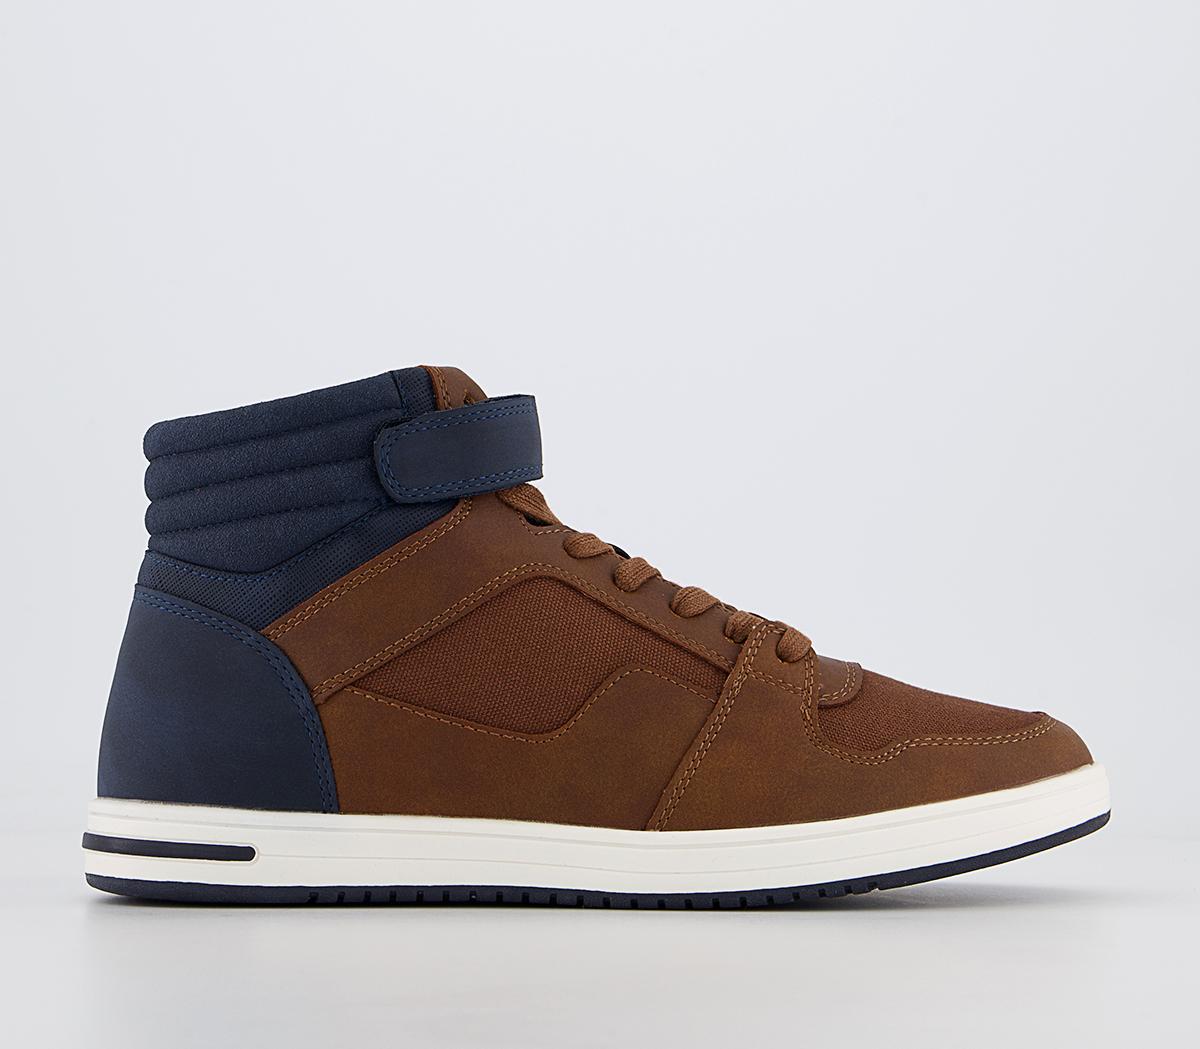 OFFICE Chilton Mid Top Strap Sneakers Tan Navy - Men's Casual Shoes